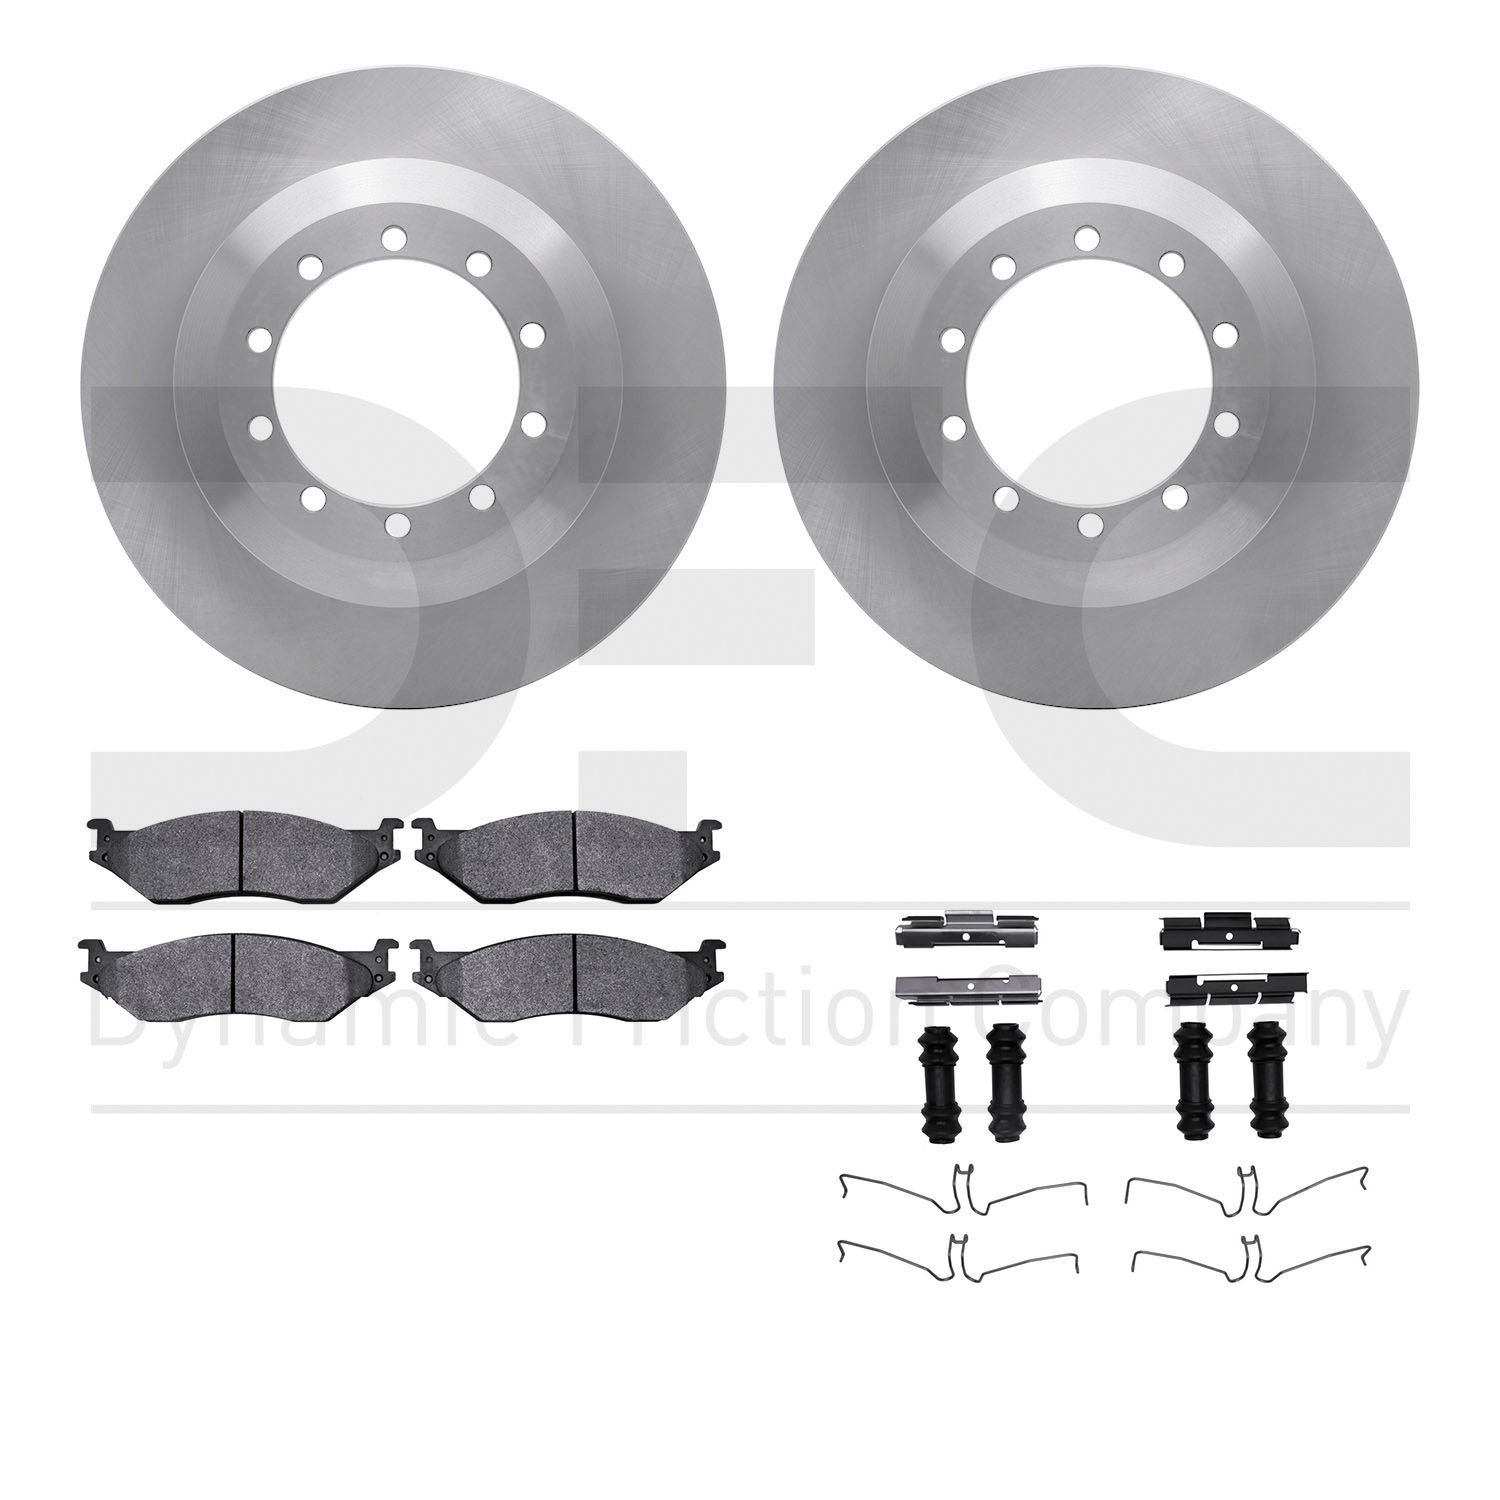 6412-54132 Brake Rotors with Ultimate-Duty Brake Pads Kit & Hardware, 2006-2019 Ford/Lincoln/Mercury/Mazda, Position: Rear, Fron